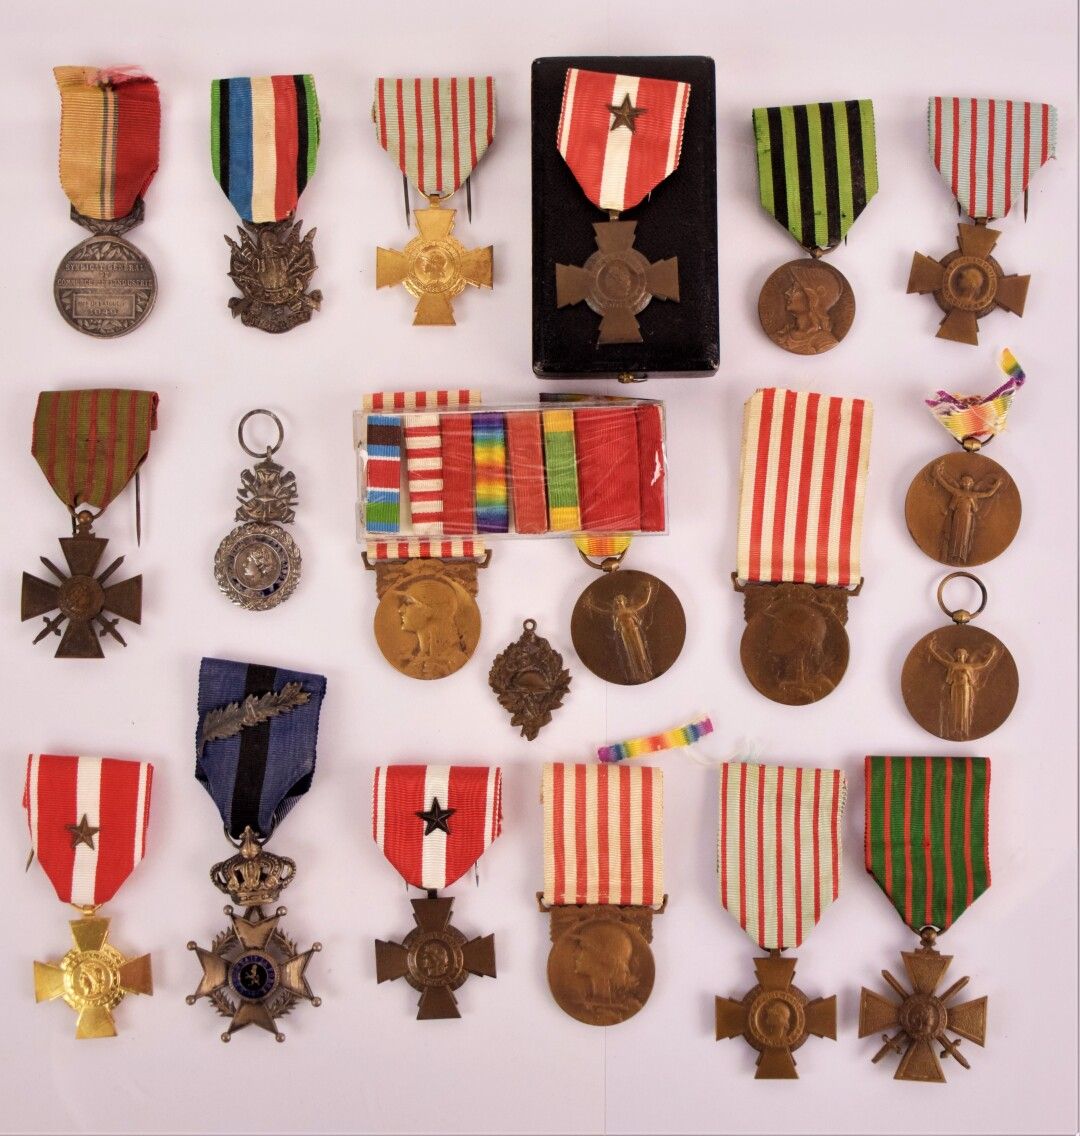 Null [MILITARIA]

Collection of about 19 medals including: 

- Commemorative med&hellip;